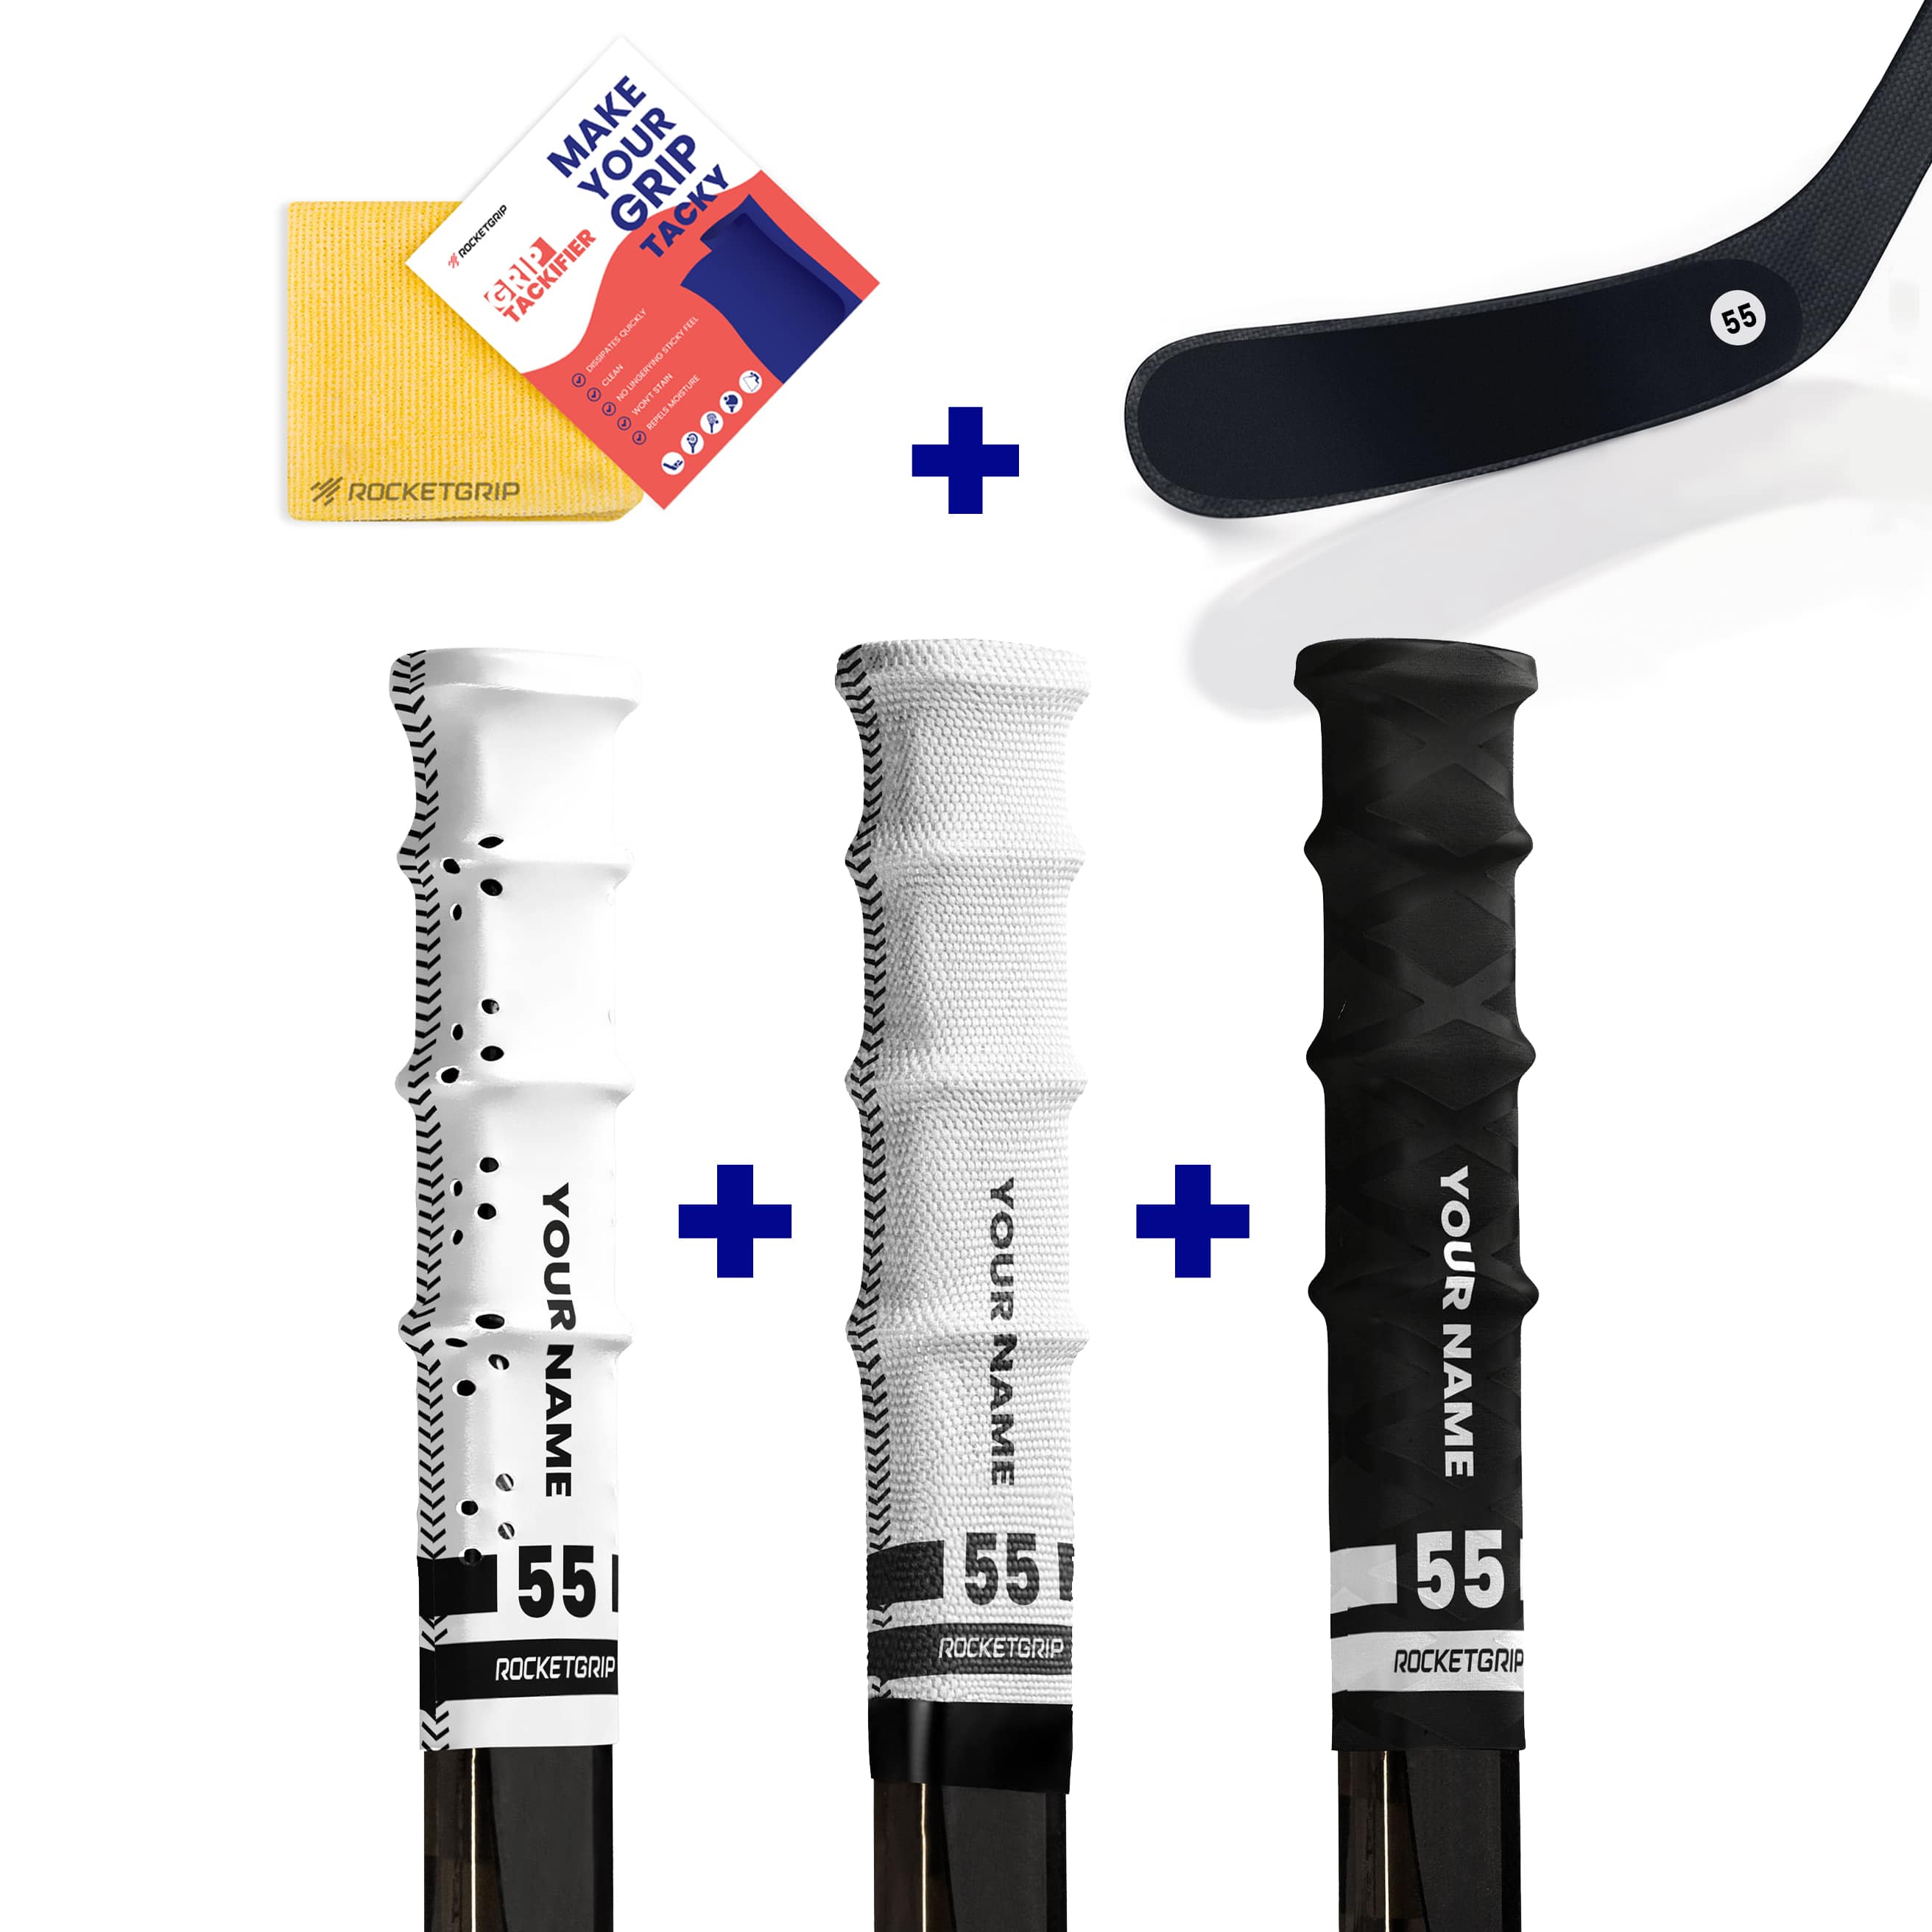 Ultimate-Pack Color Hockey Grips